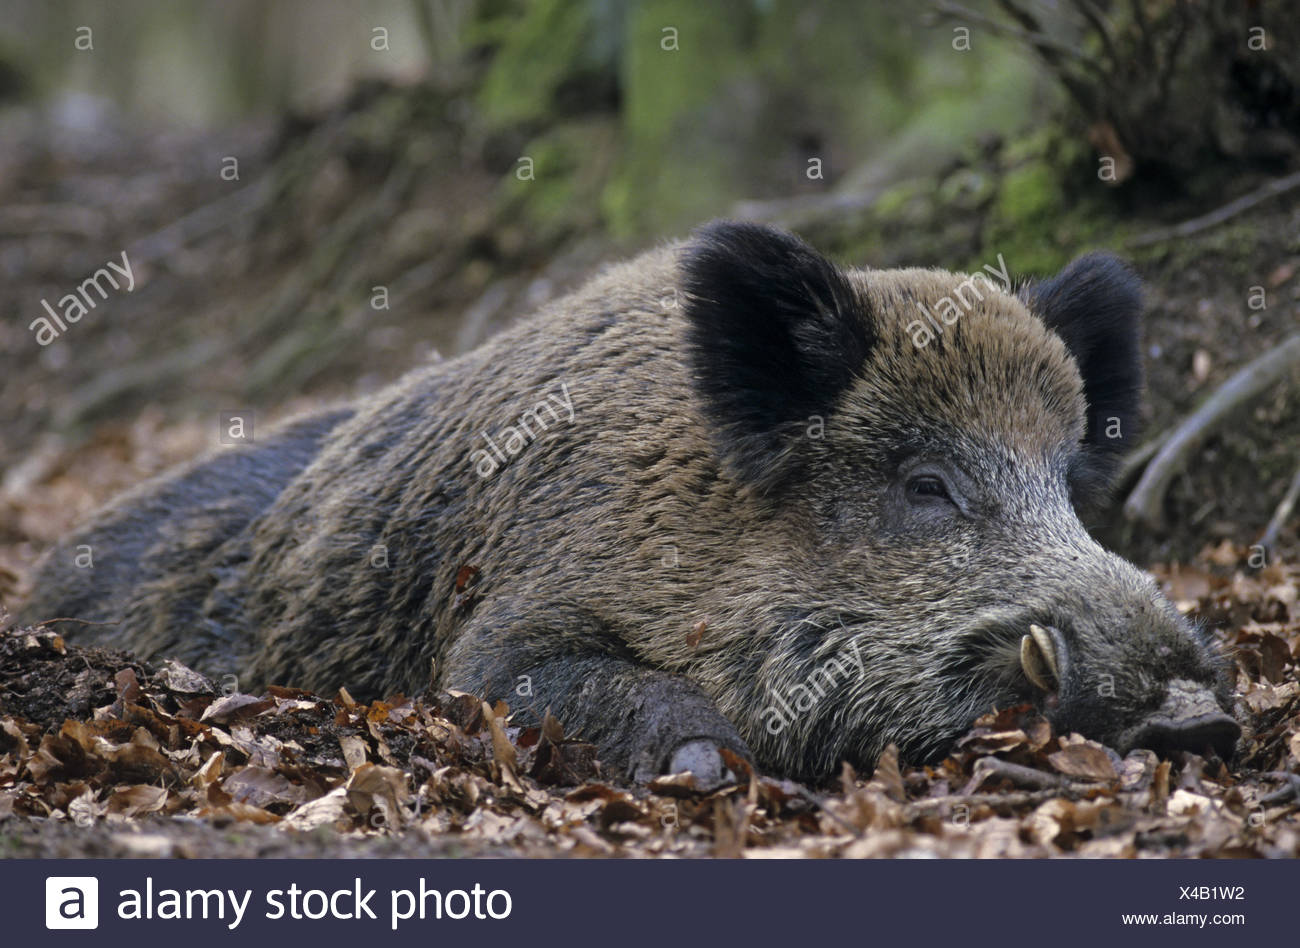 Boar Hog Rests On The Forest Floor Stock Photo 278067470 Alamy